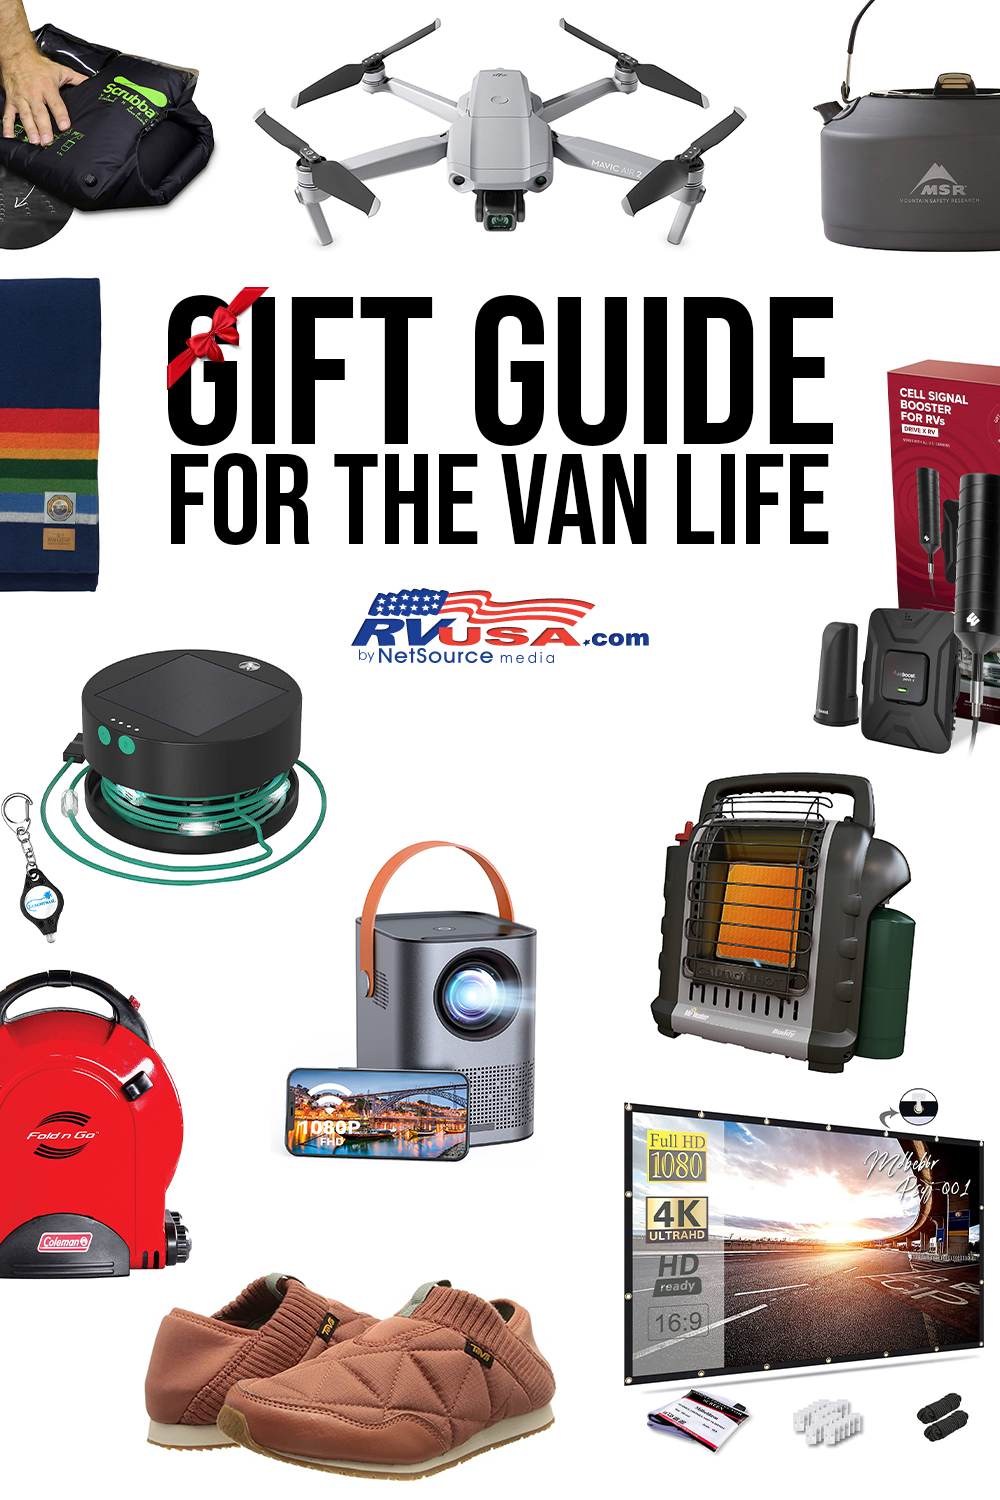 A collage of items for a van life gift guide